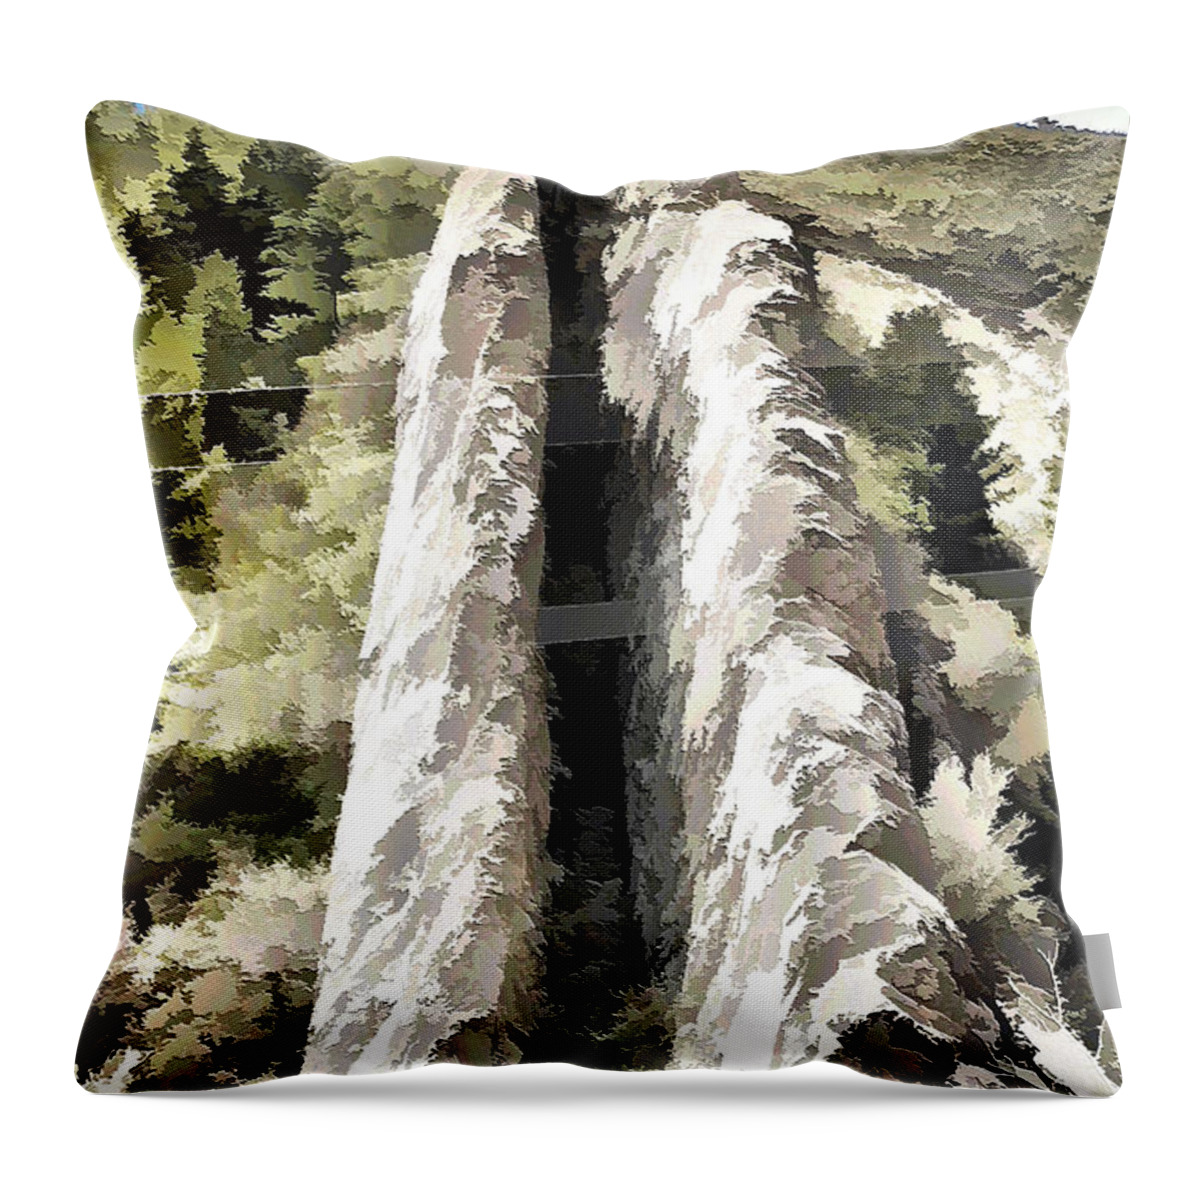 Weber Canyon Throw Pillow featuring the photograph Devils Slide by Ely Arsha